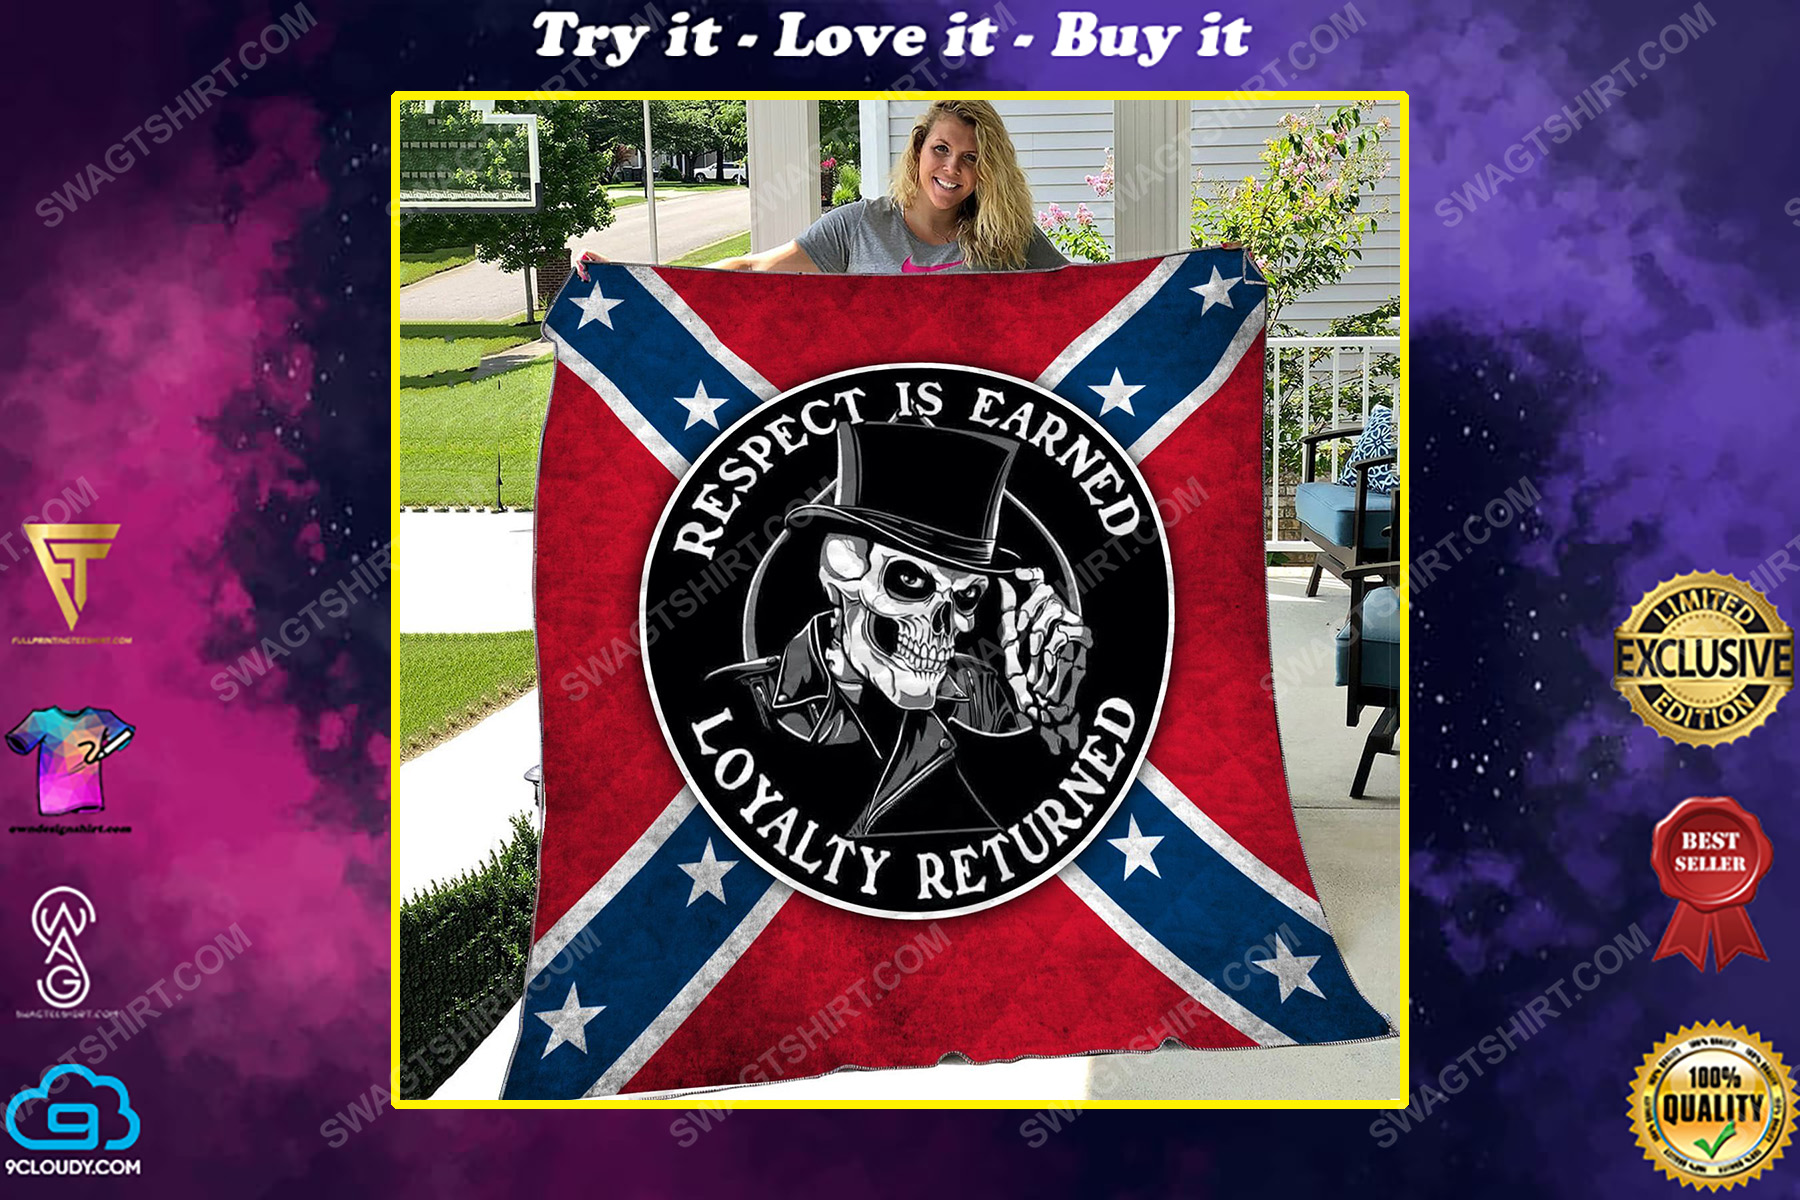 Confederate states of america respect is earned not given quilt